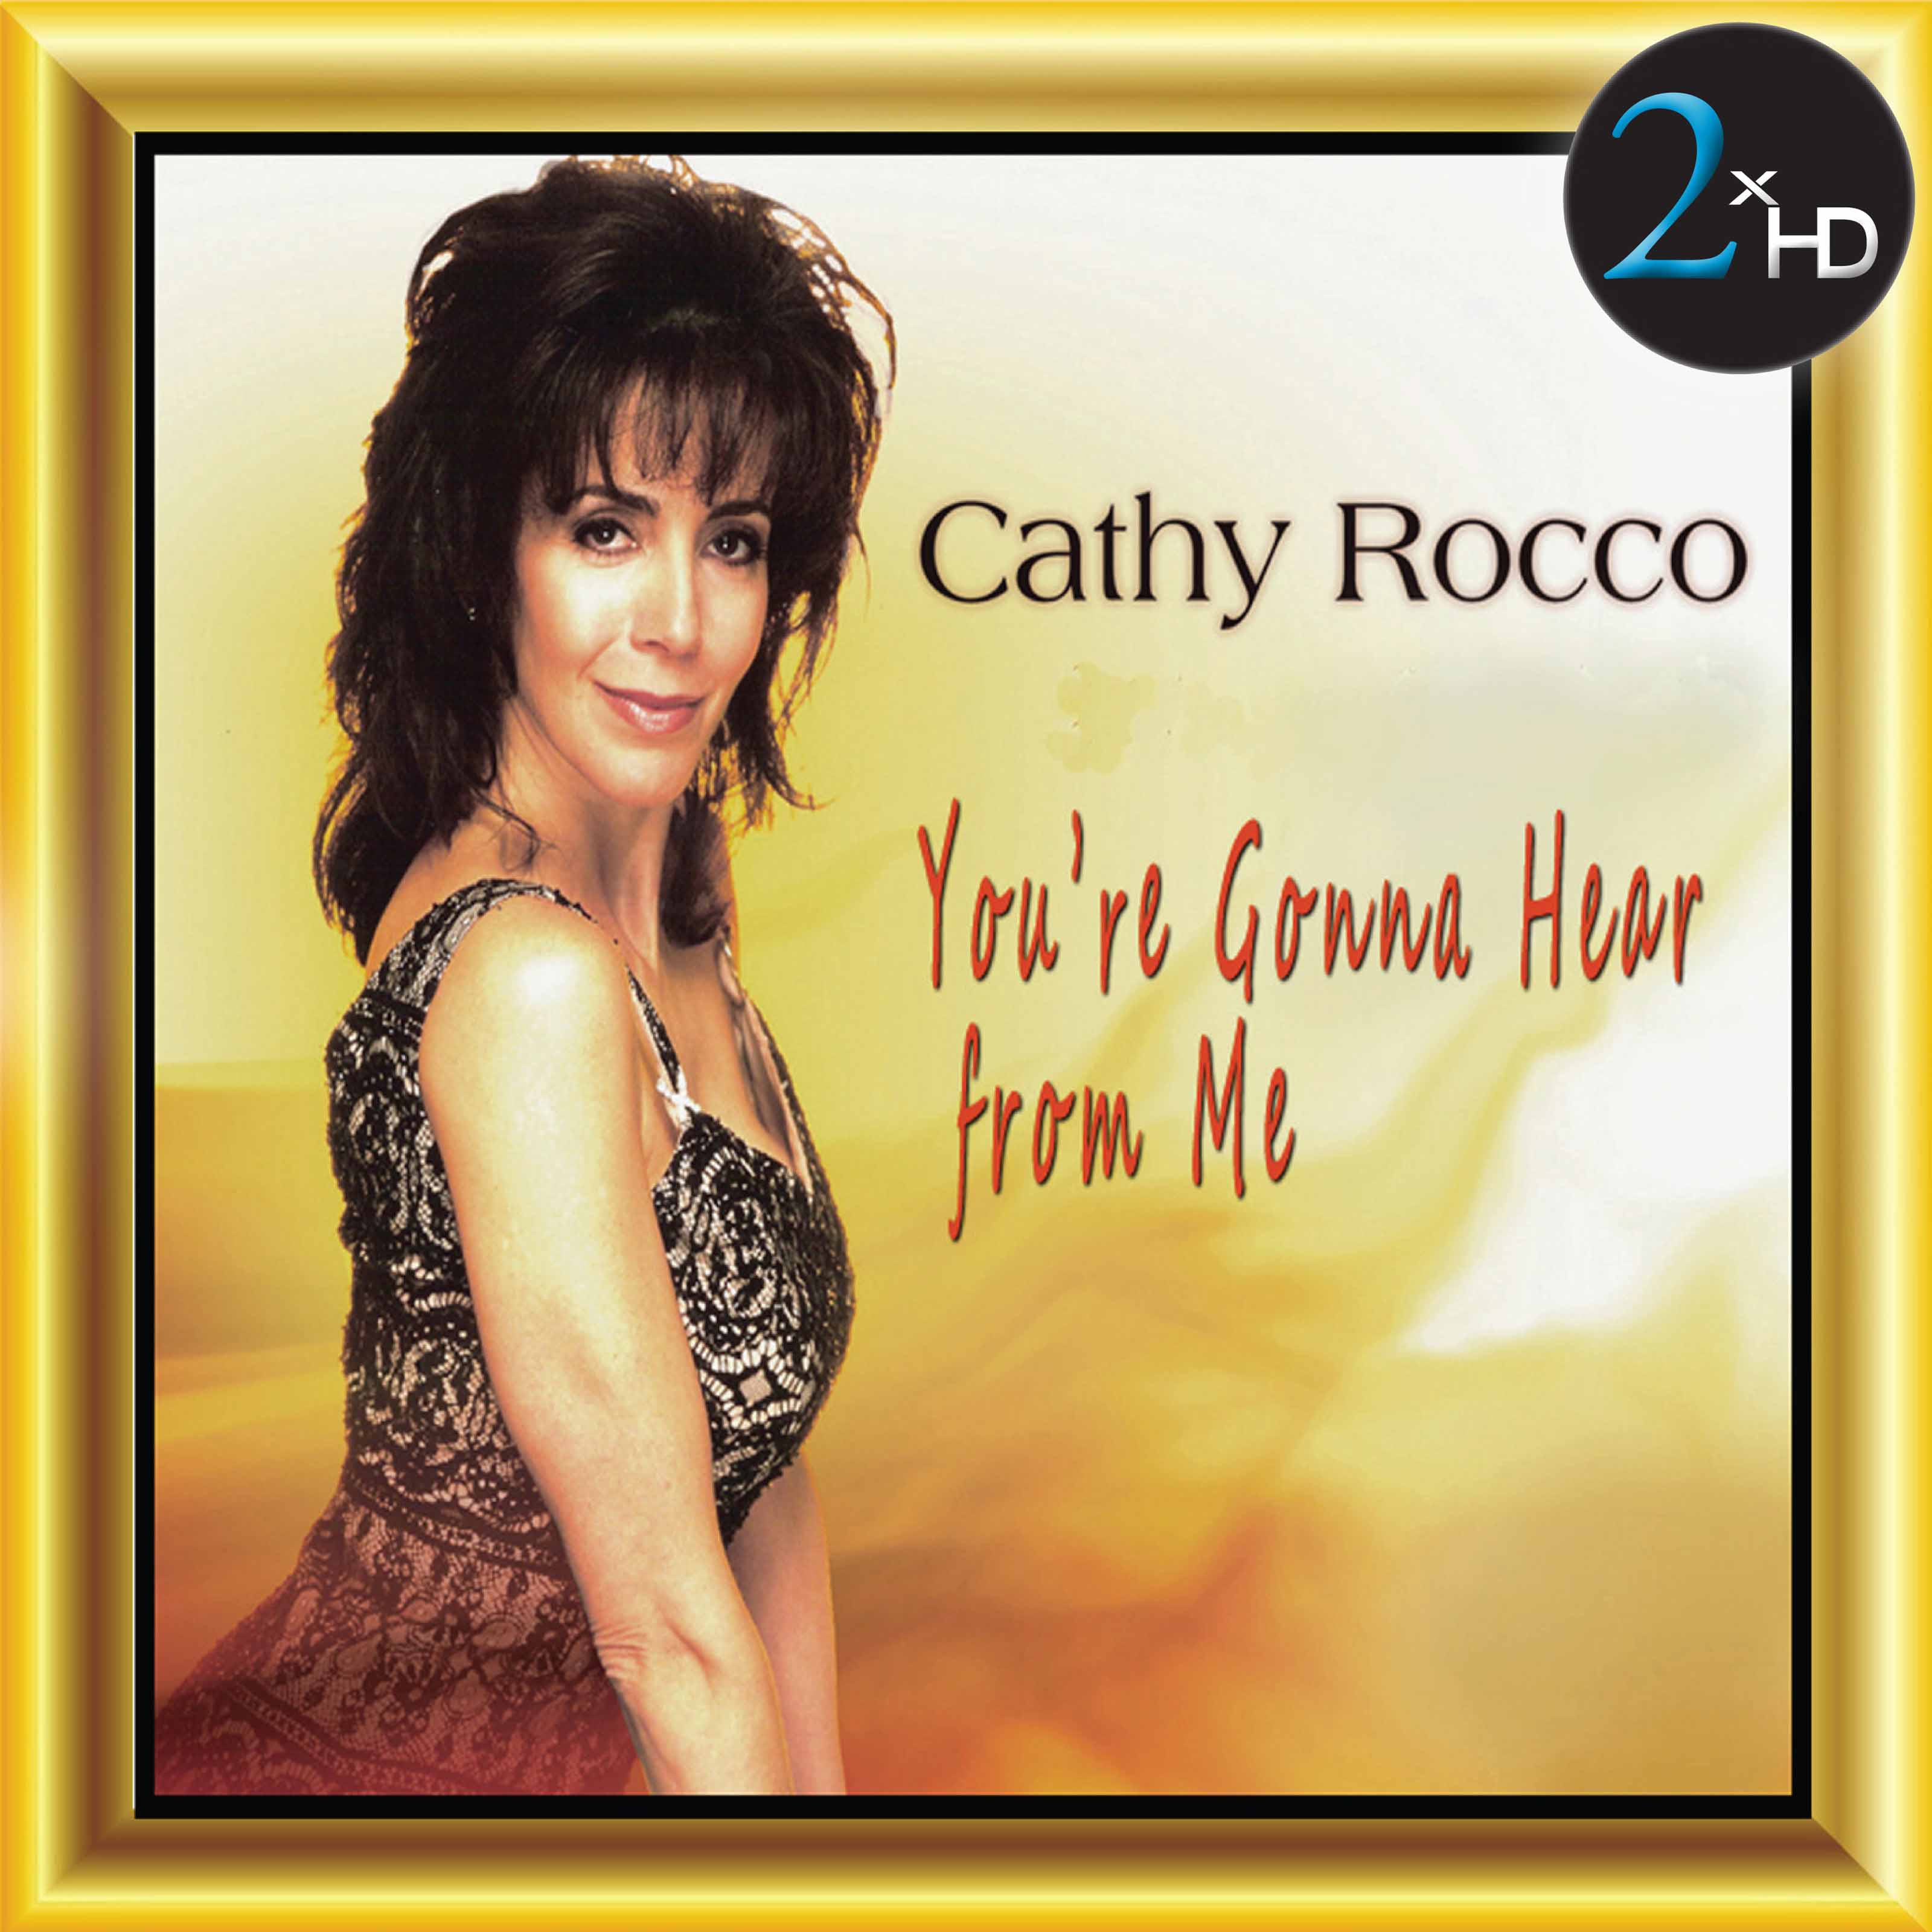 Cathy Rocco - You’re Gonna Hear From Me (2008/2017) [HDTracks FLAC 24bit/44,1kHz]